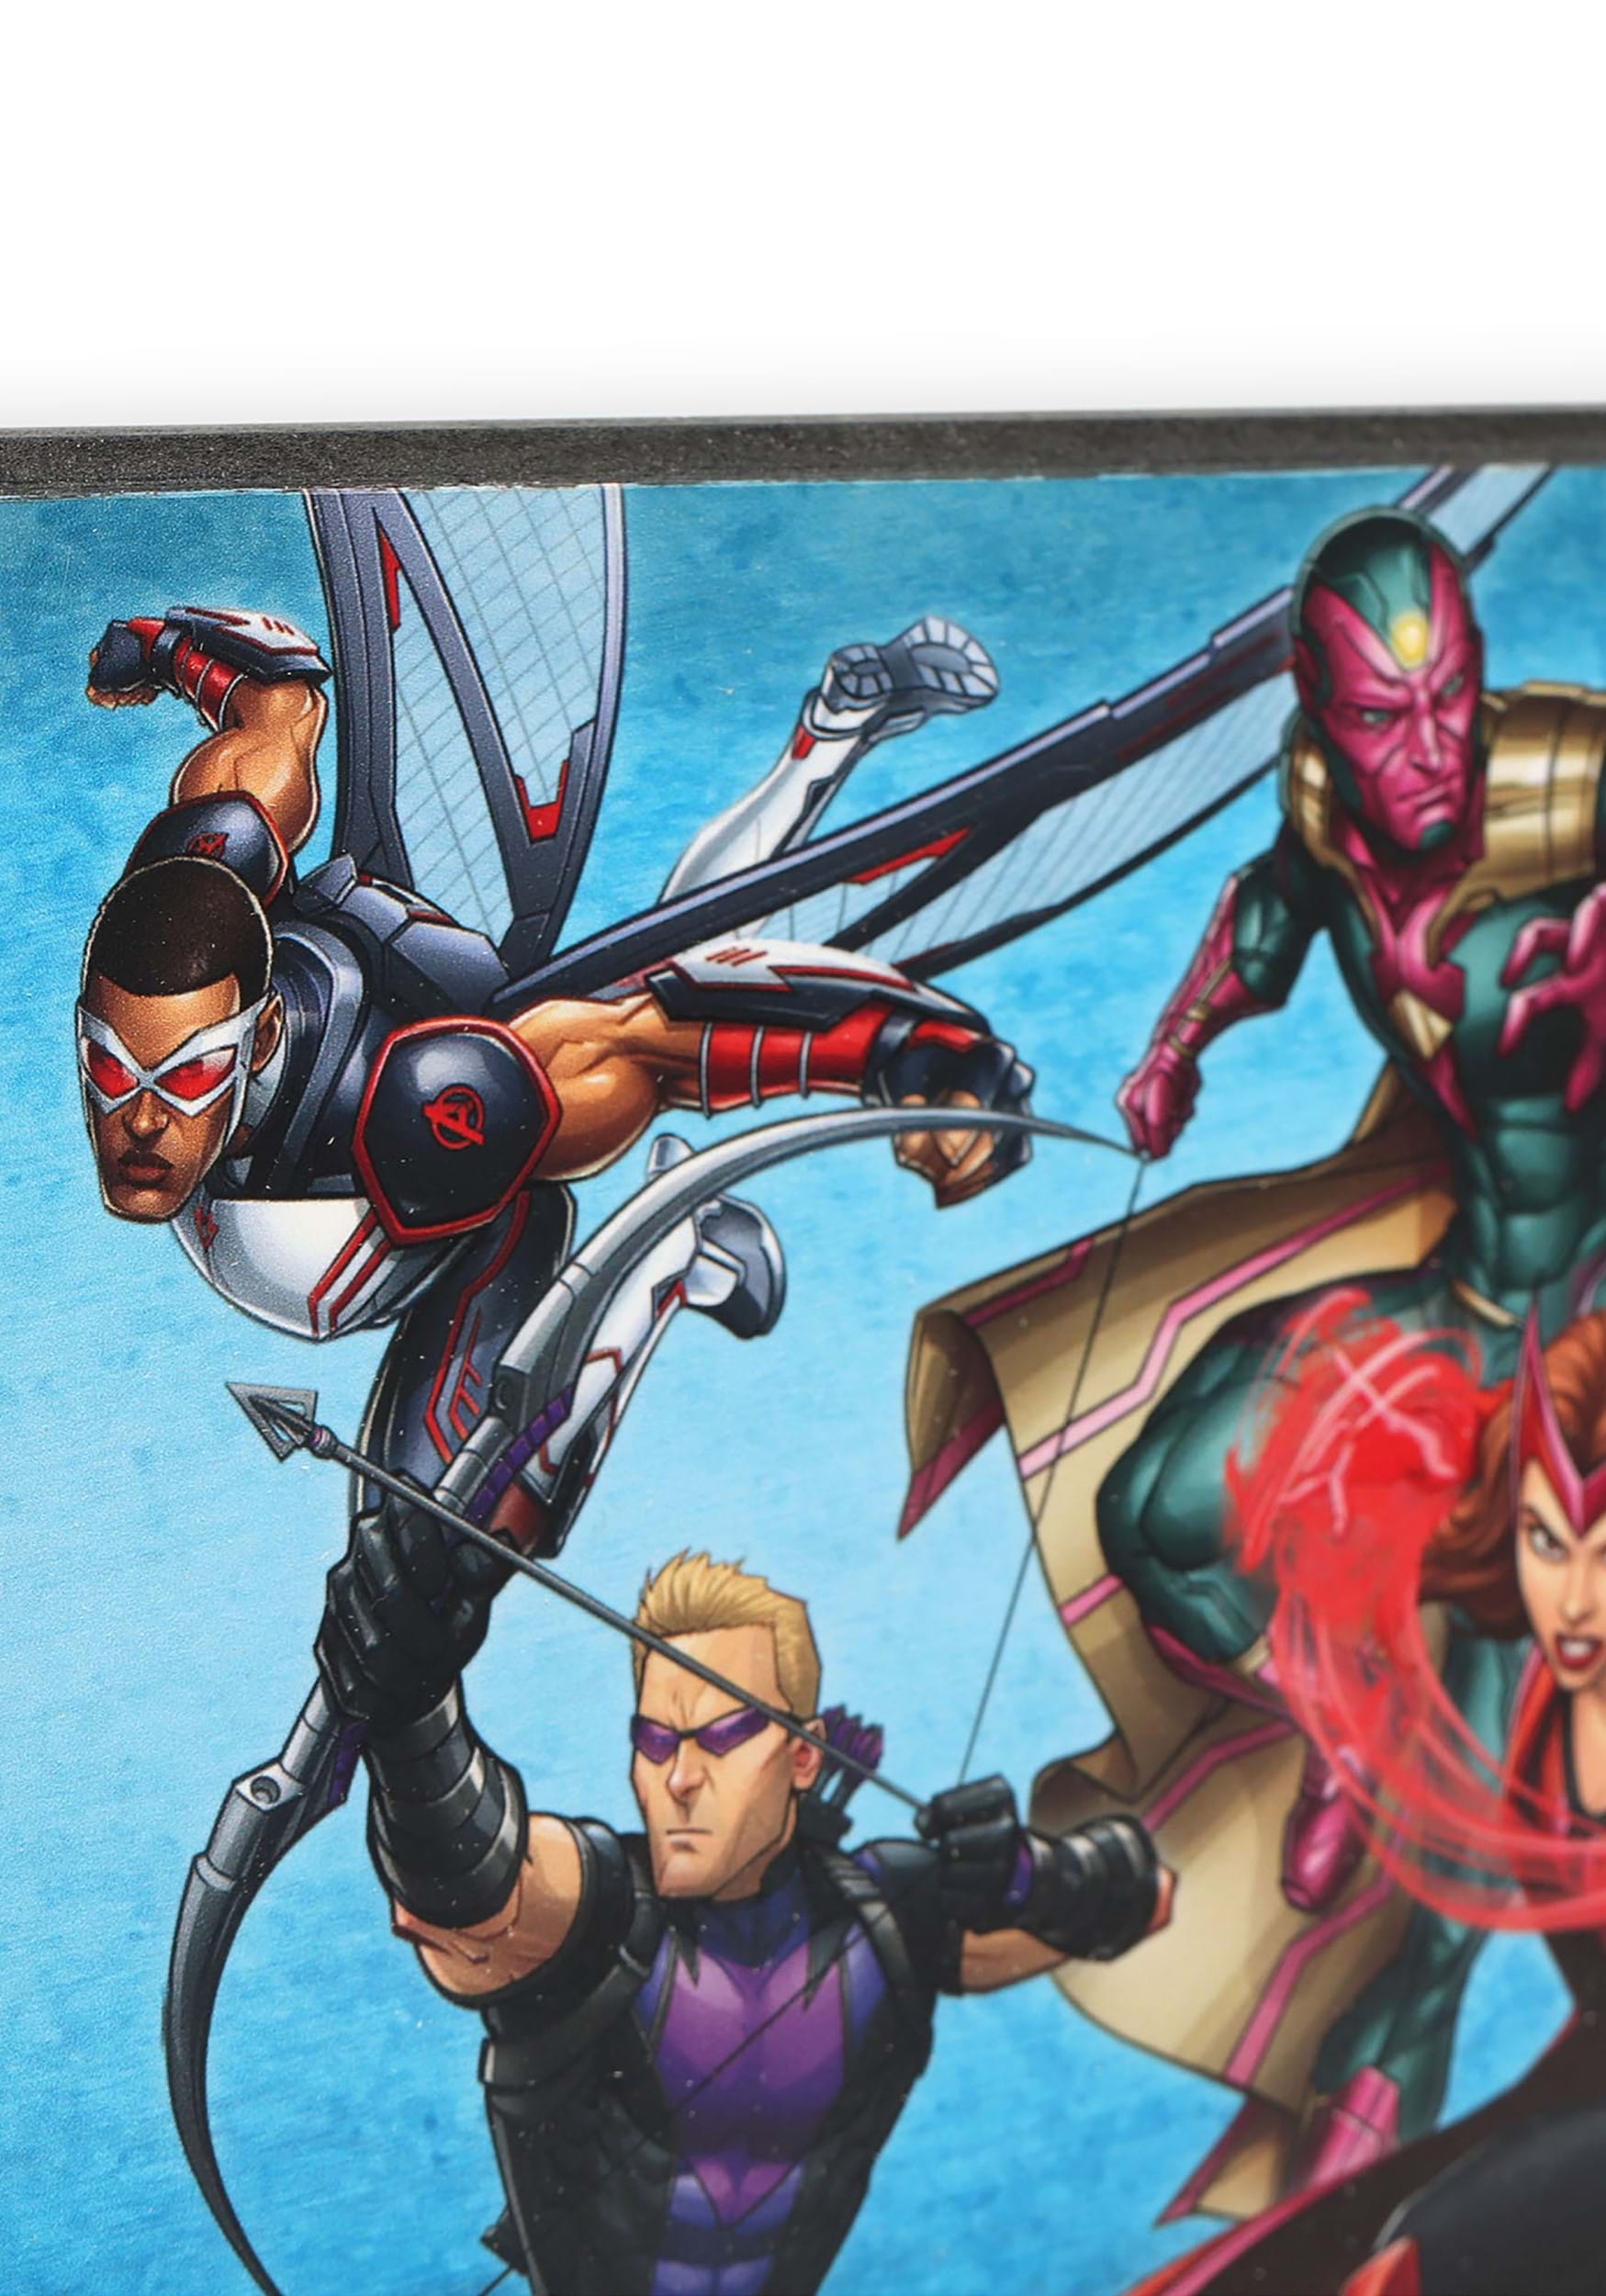 Wood Wall Decoration: Marvel Heroes Collage